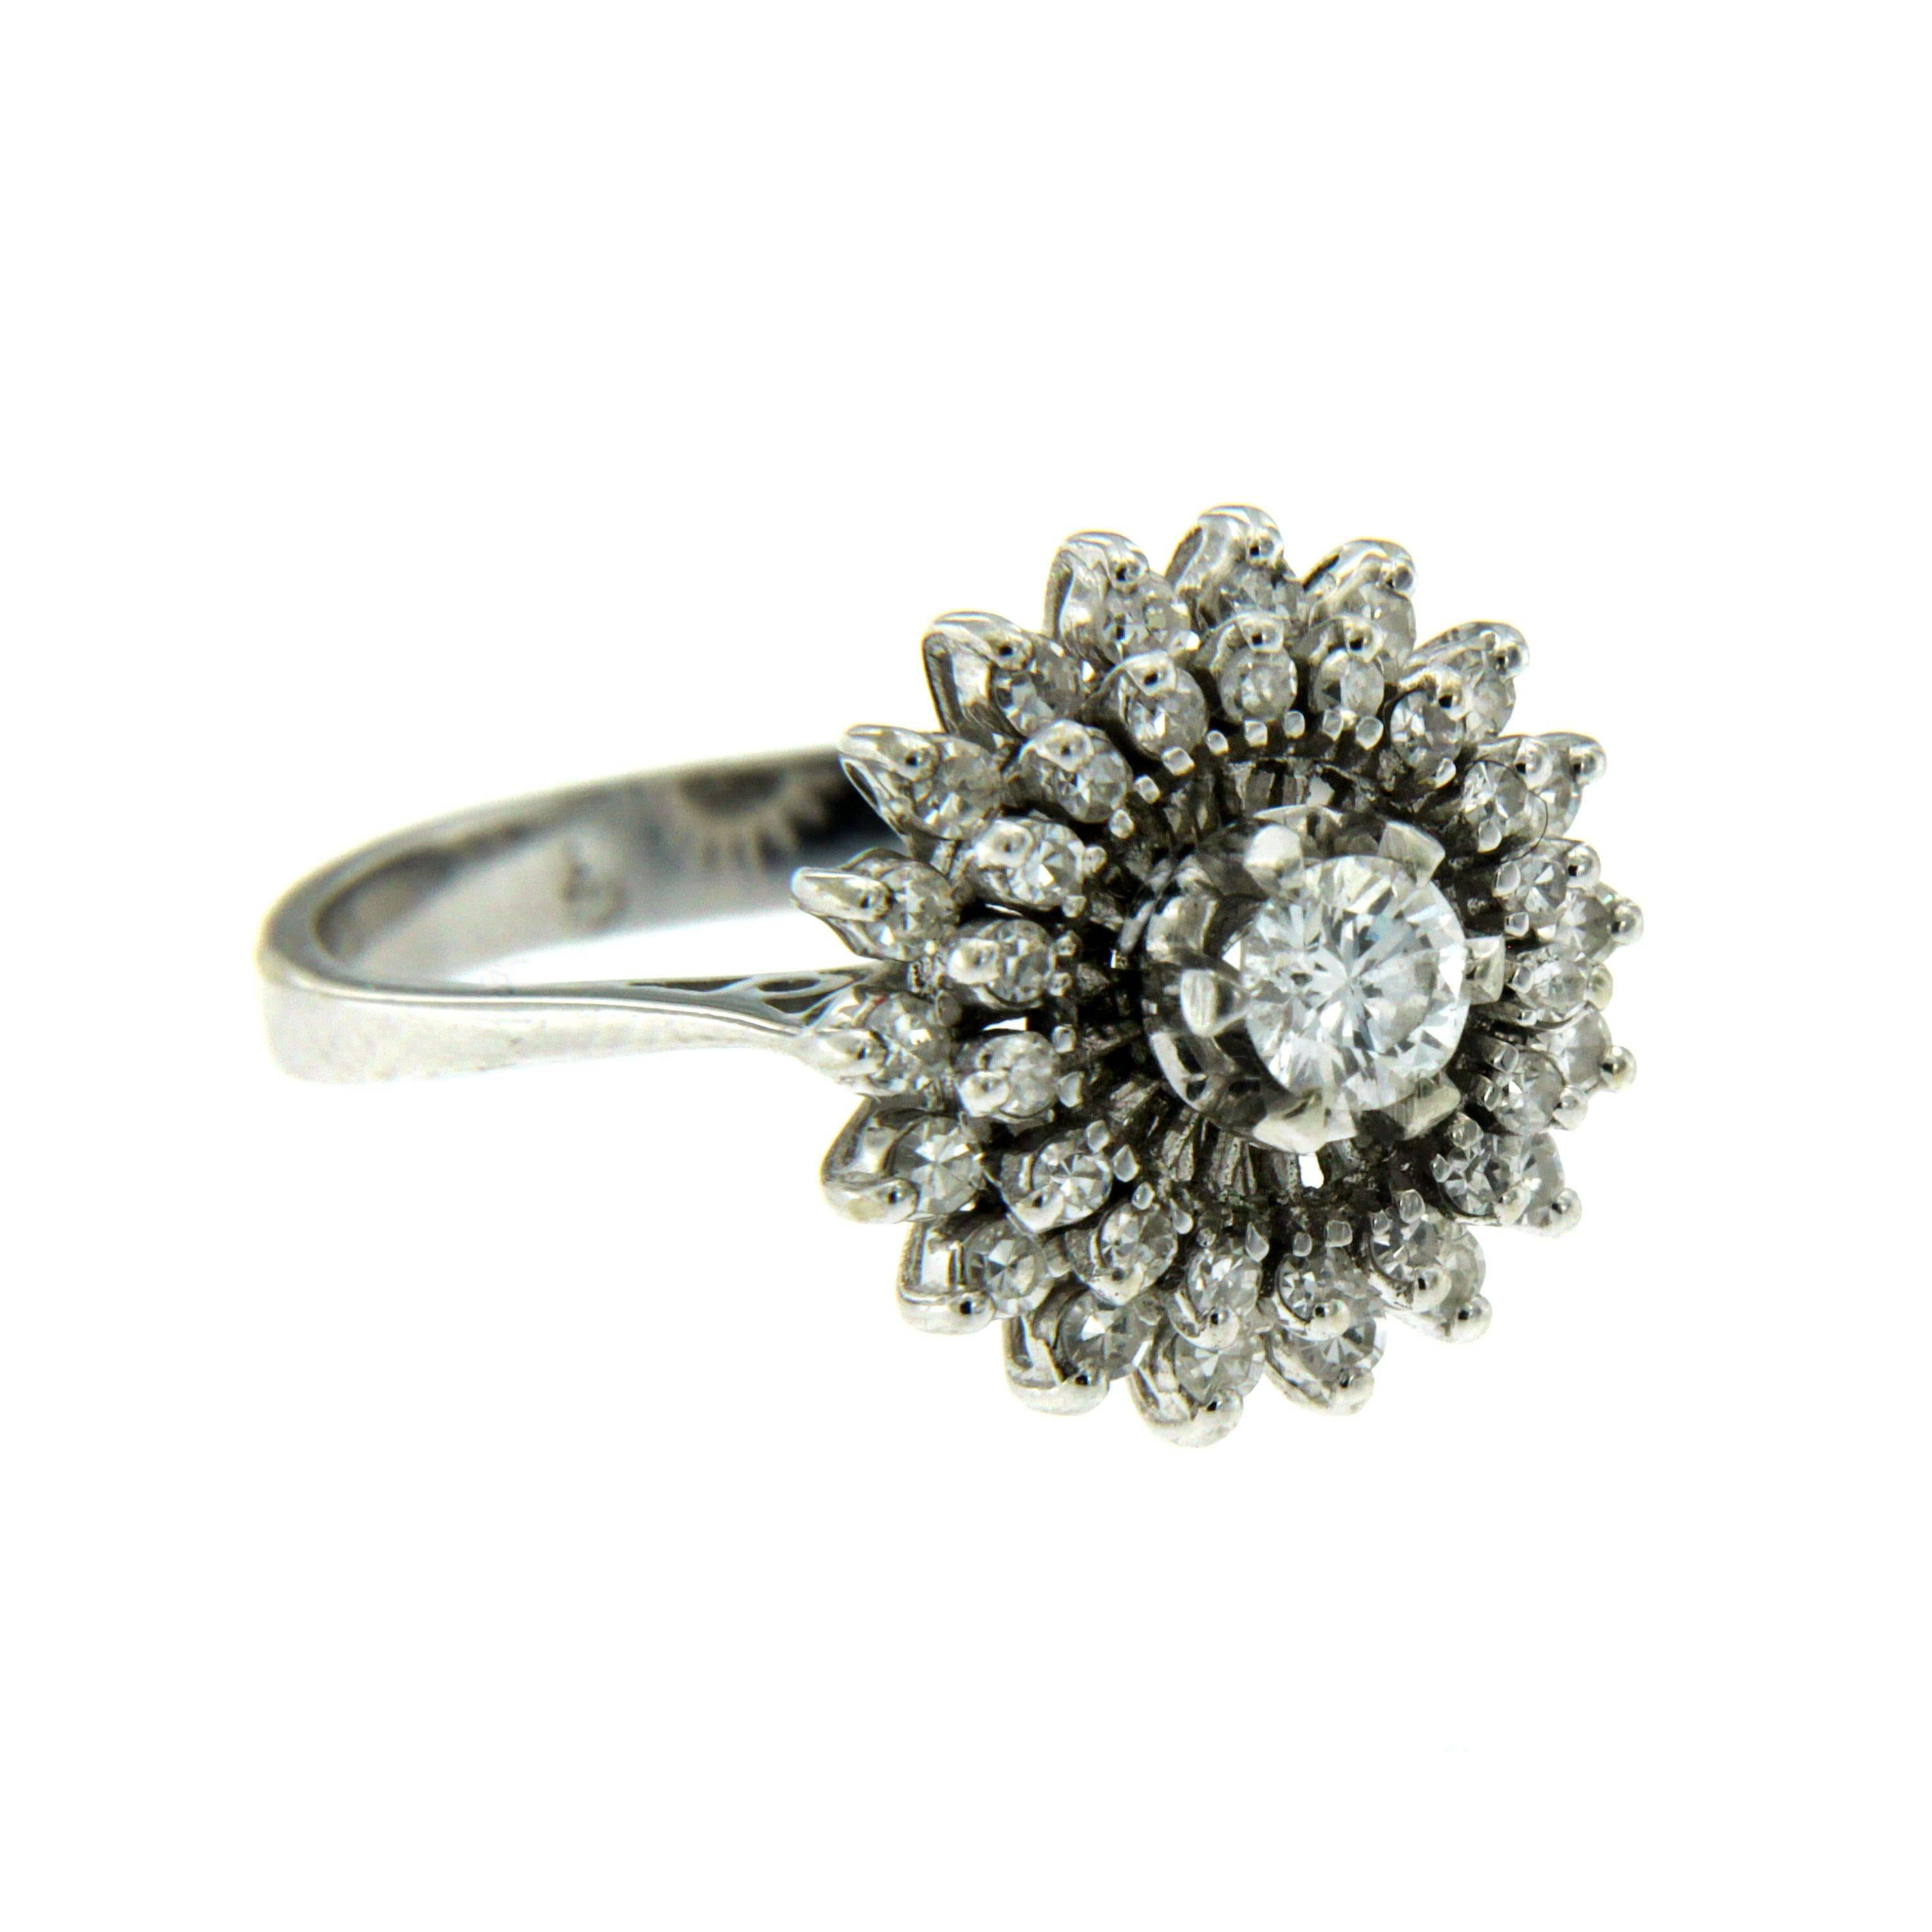 A stunning 18k white Gold ring featuring a flower design set in the center with a 0.40 ct round brilliant cut diamond framed by a double halo consisting of 0.15 carat of round brilliant cut diamonds graded F-G color and Vvs clarity. 
Circa